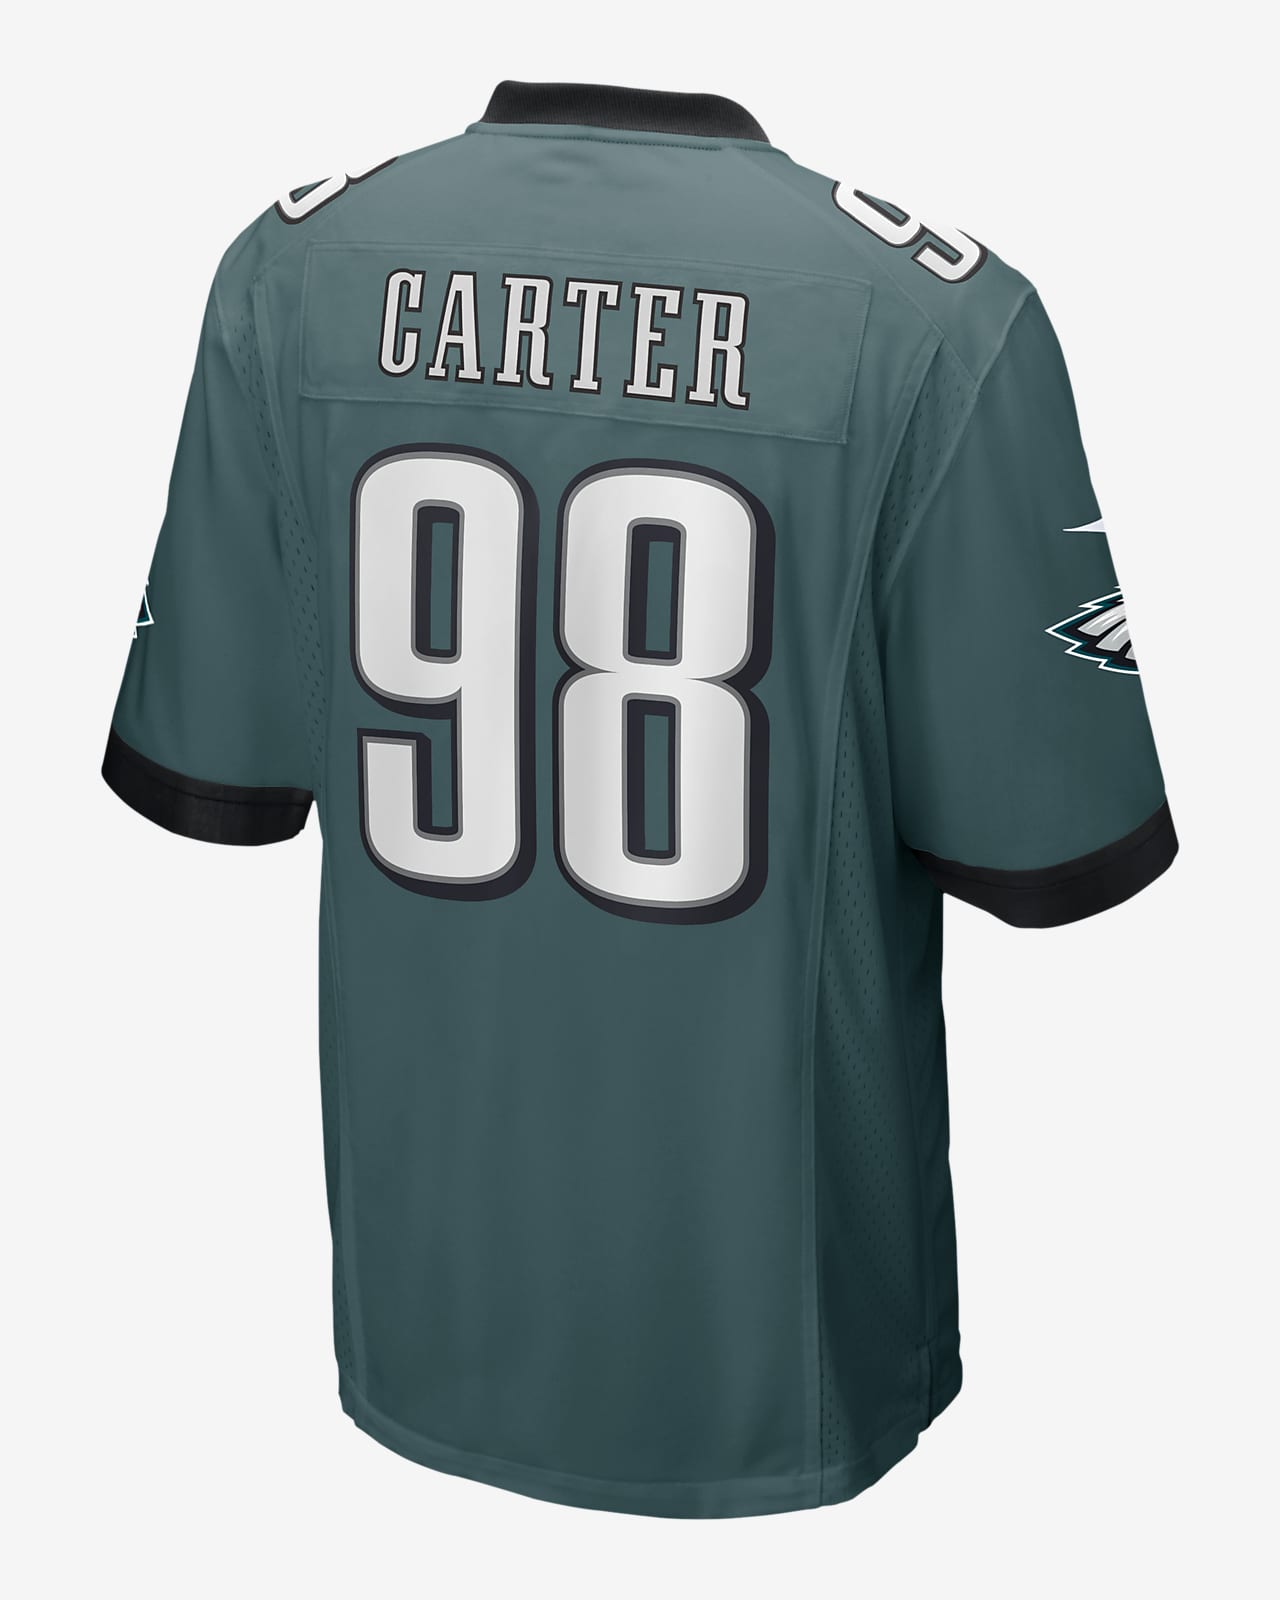 eagles jersey's